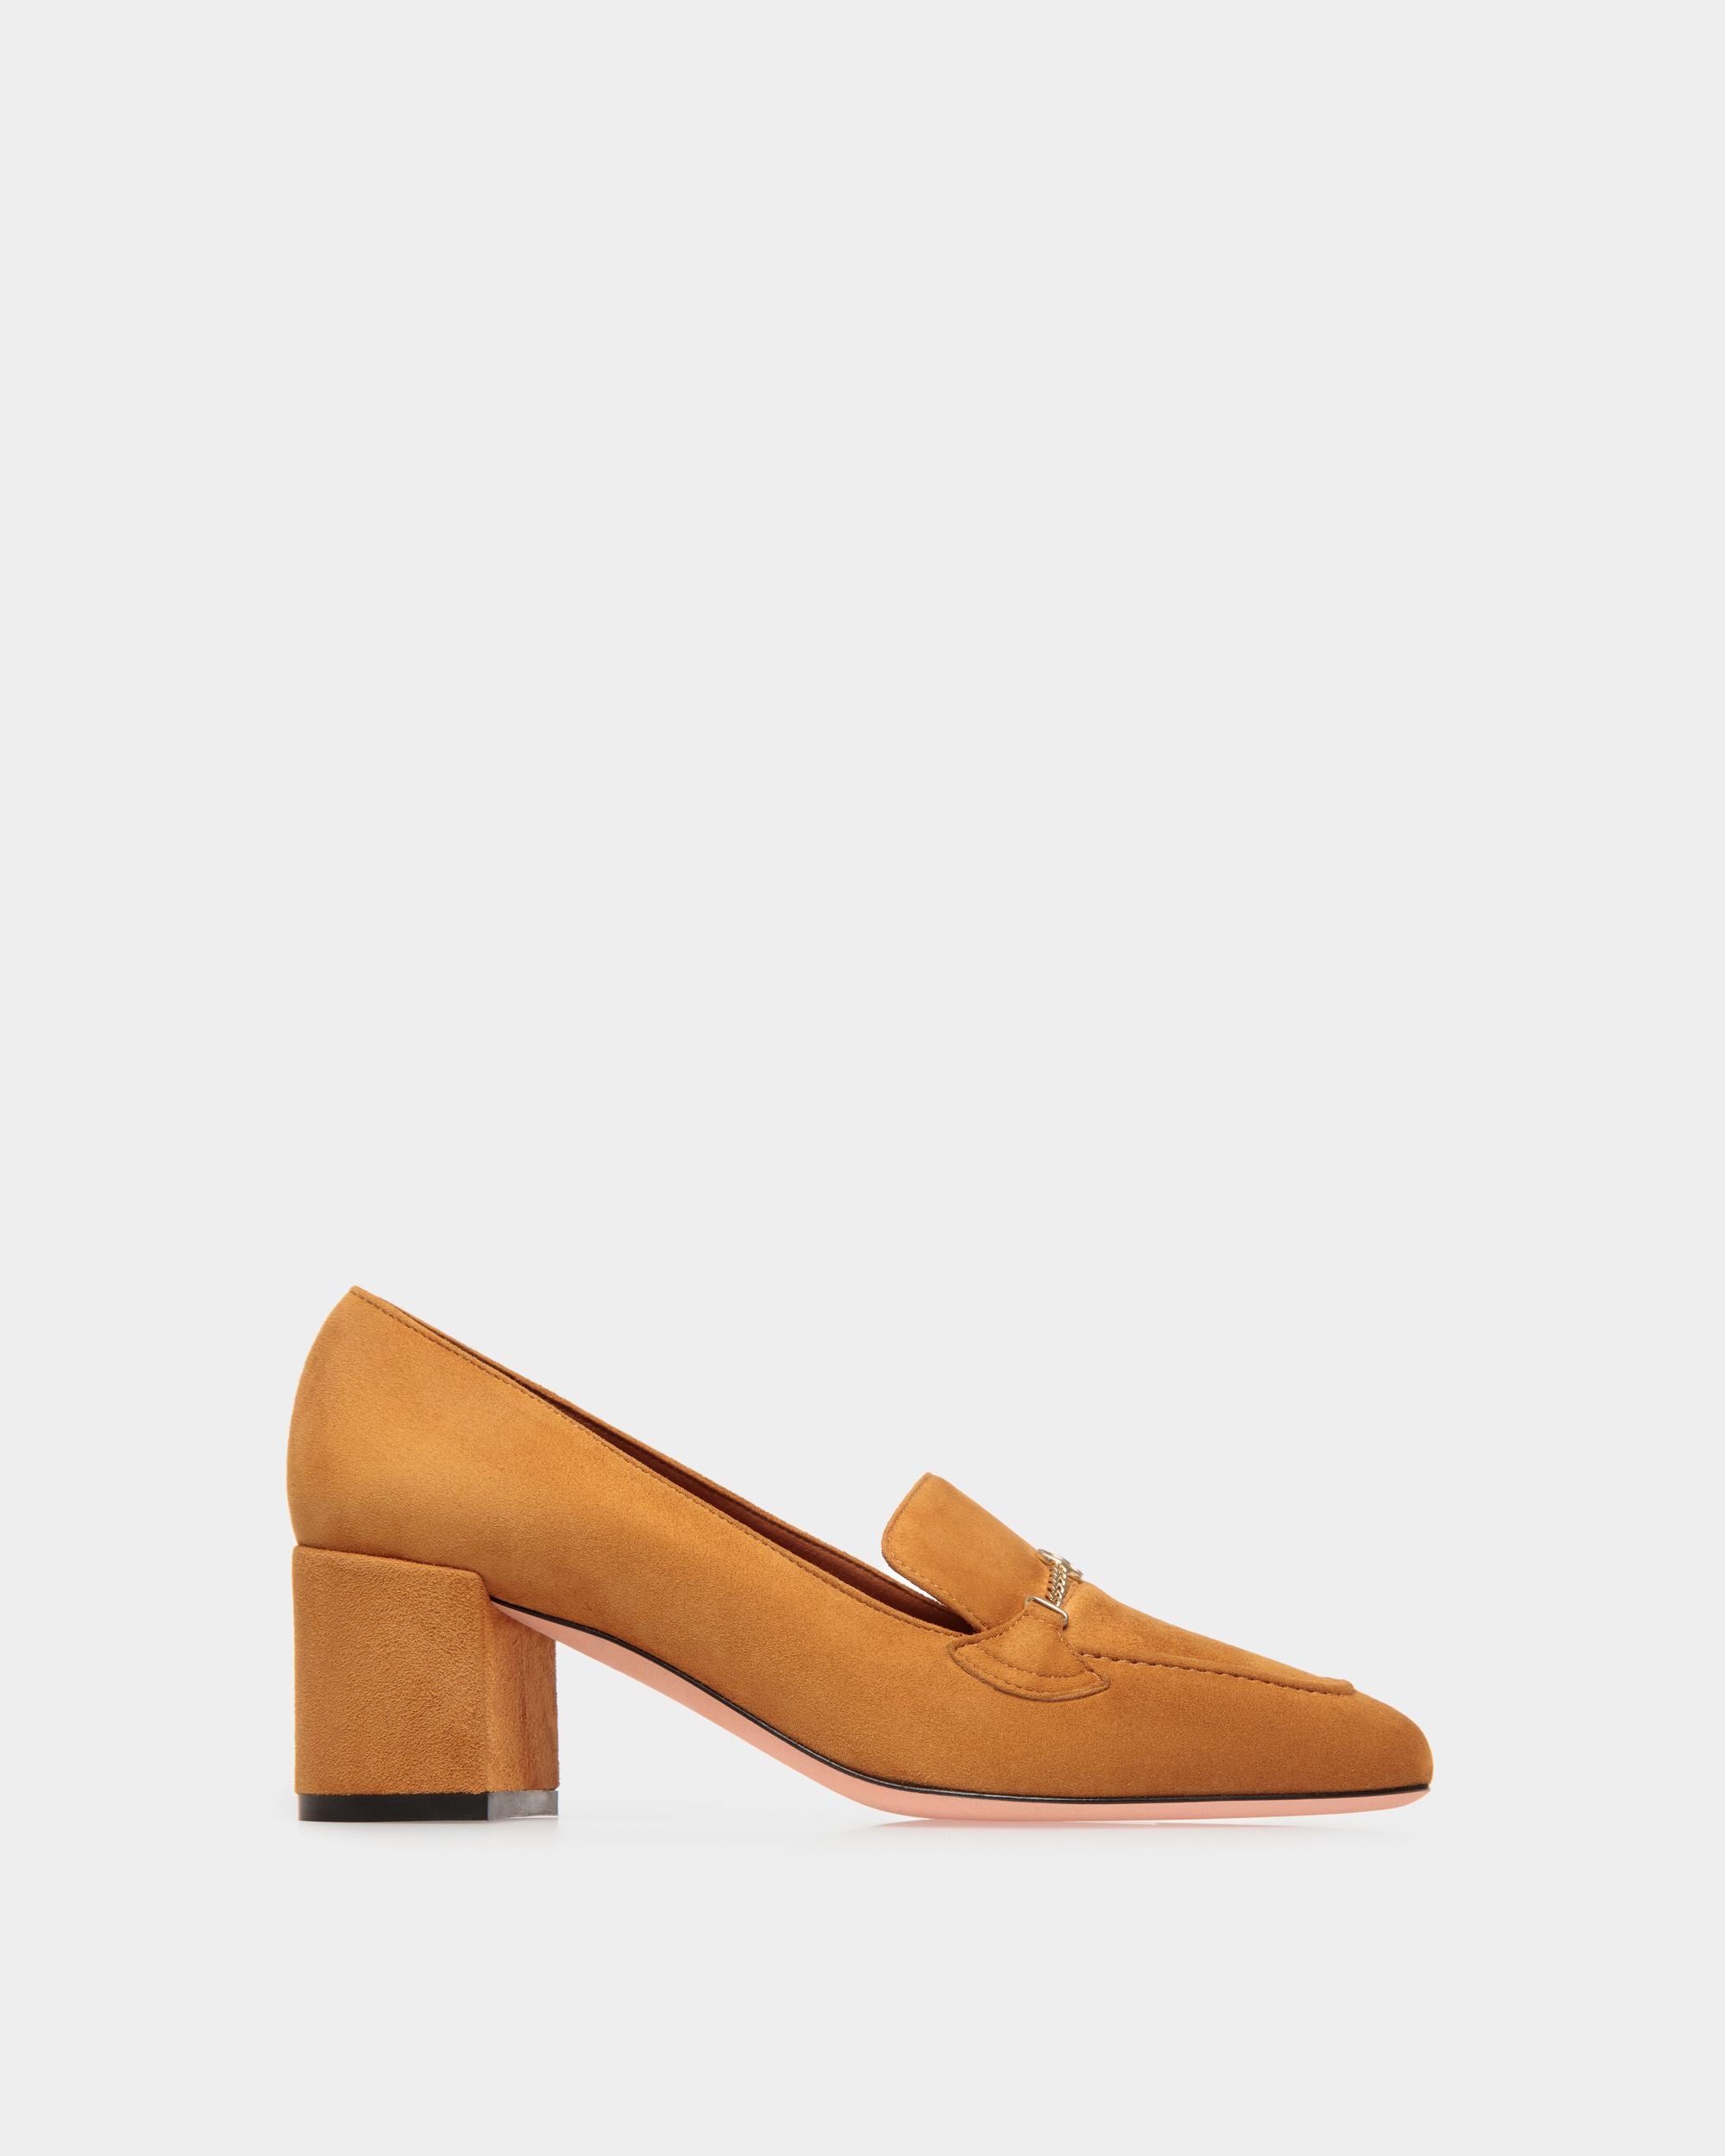 Daily Emblem | Women's Pump in Brown Suede | Bally | Still Life Side